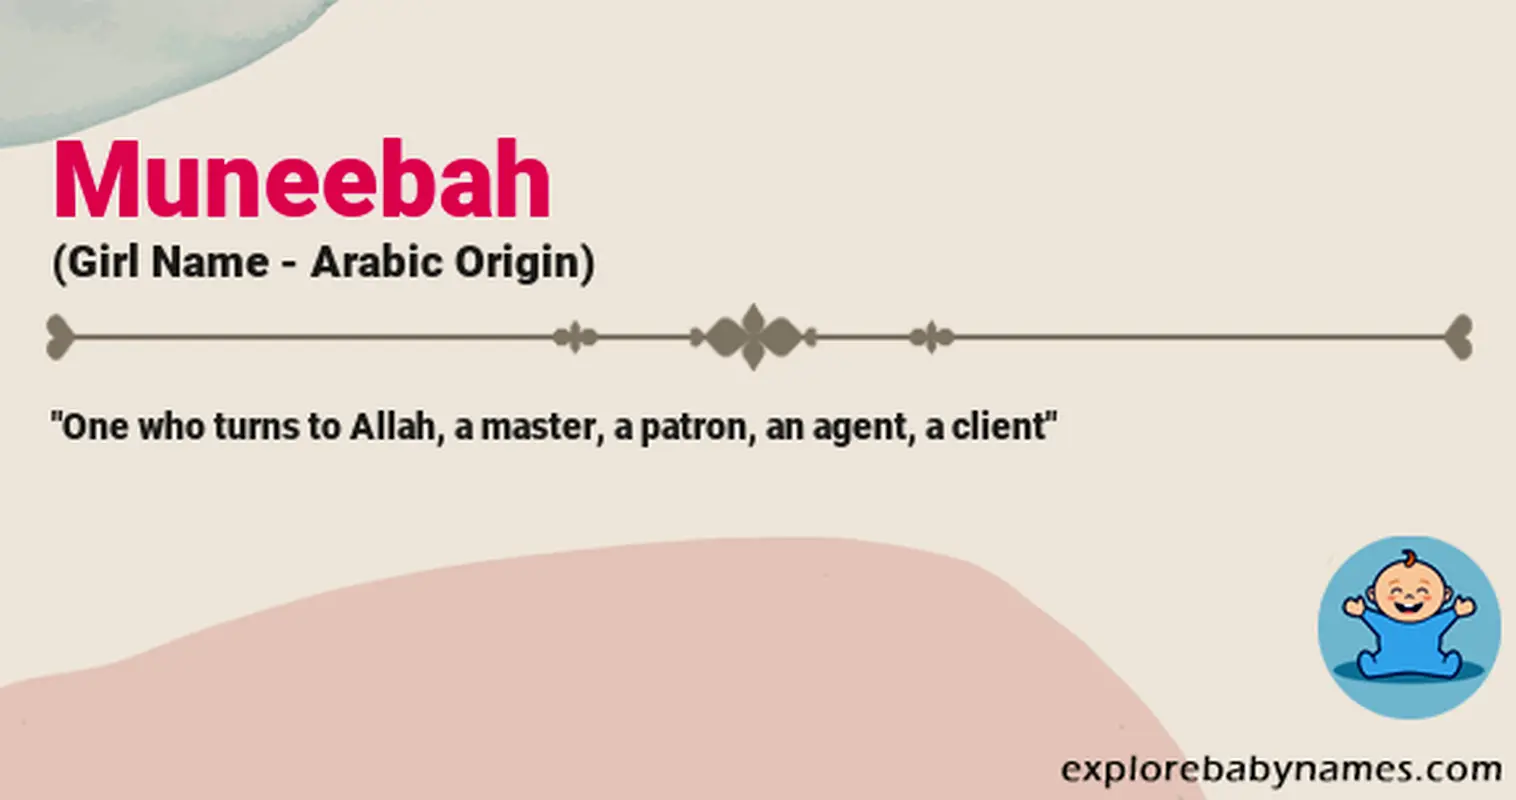 Meaning of Muneebah